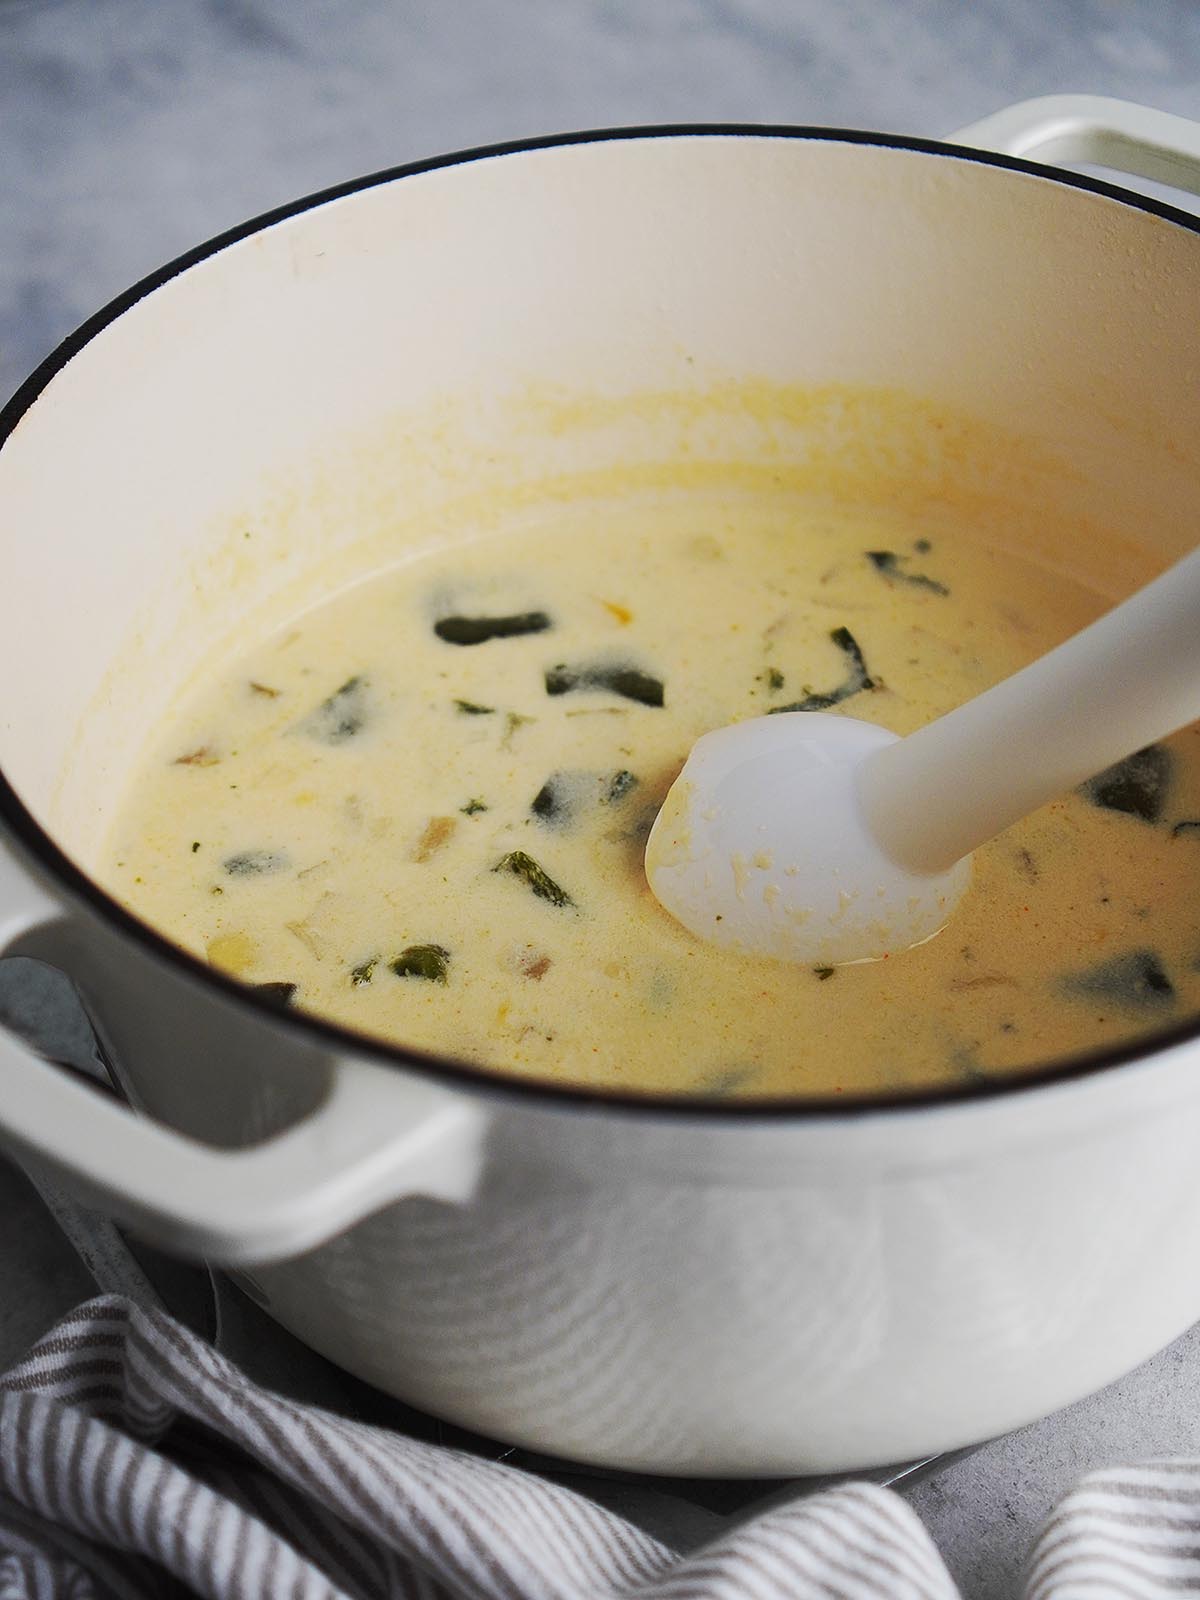 Blending soup with an immersion blender in the pot.